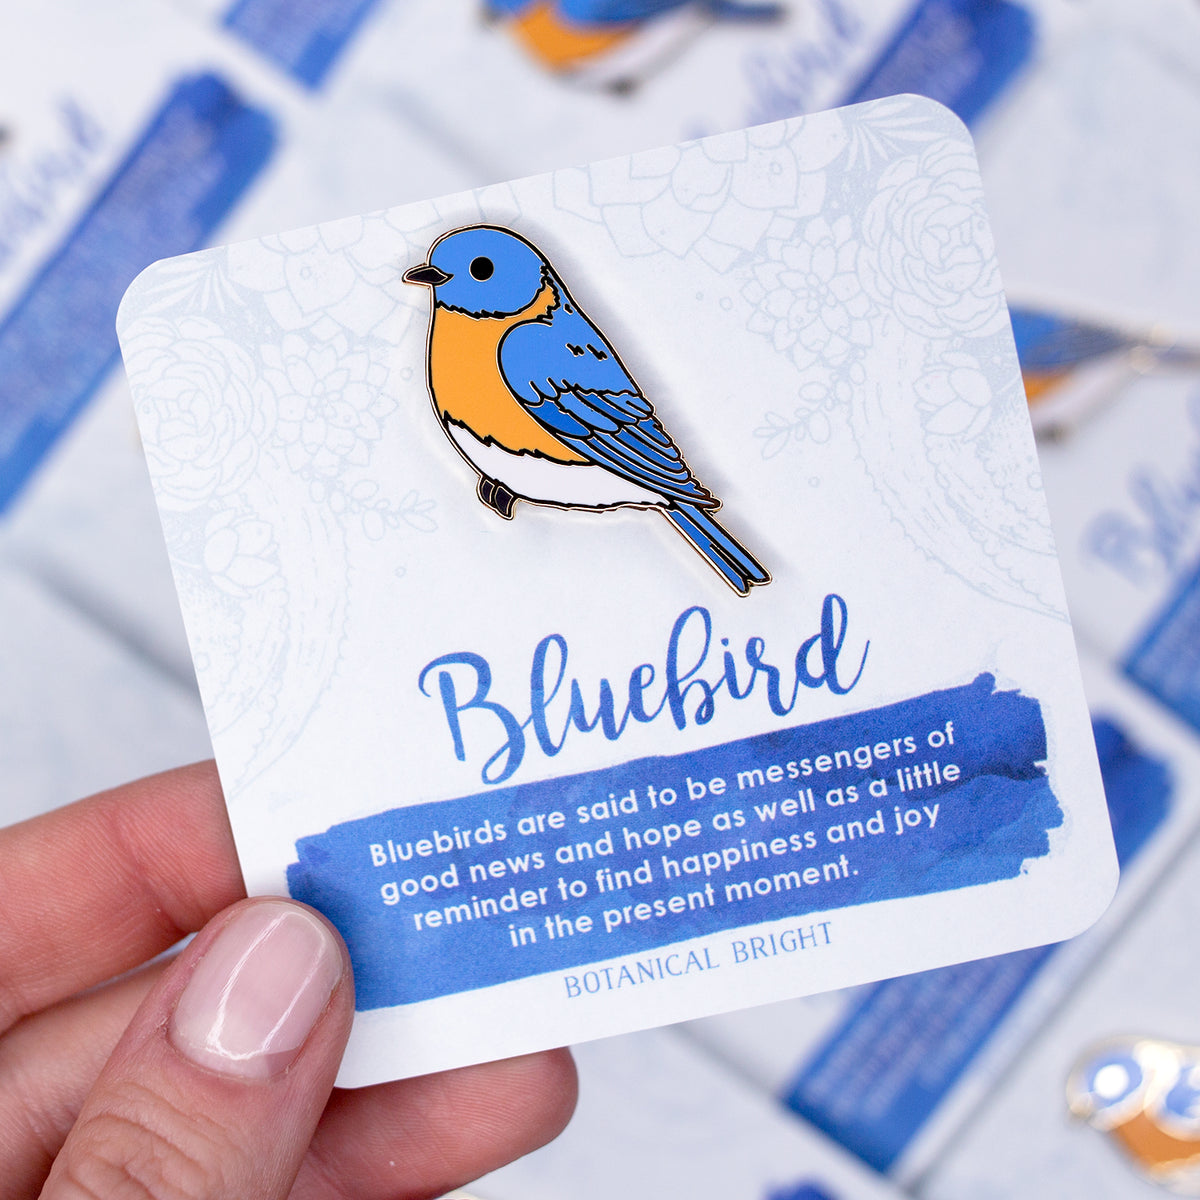 Bluebottle Butterfly Enamel Pin – Botanical Bright - Add a Little Beauty to  Your Everyday